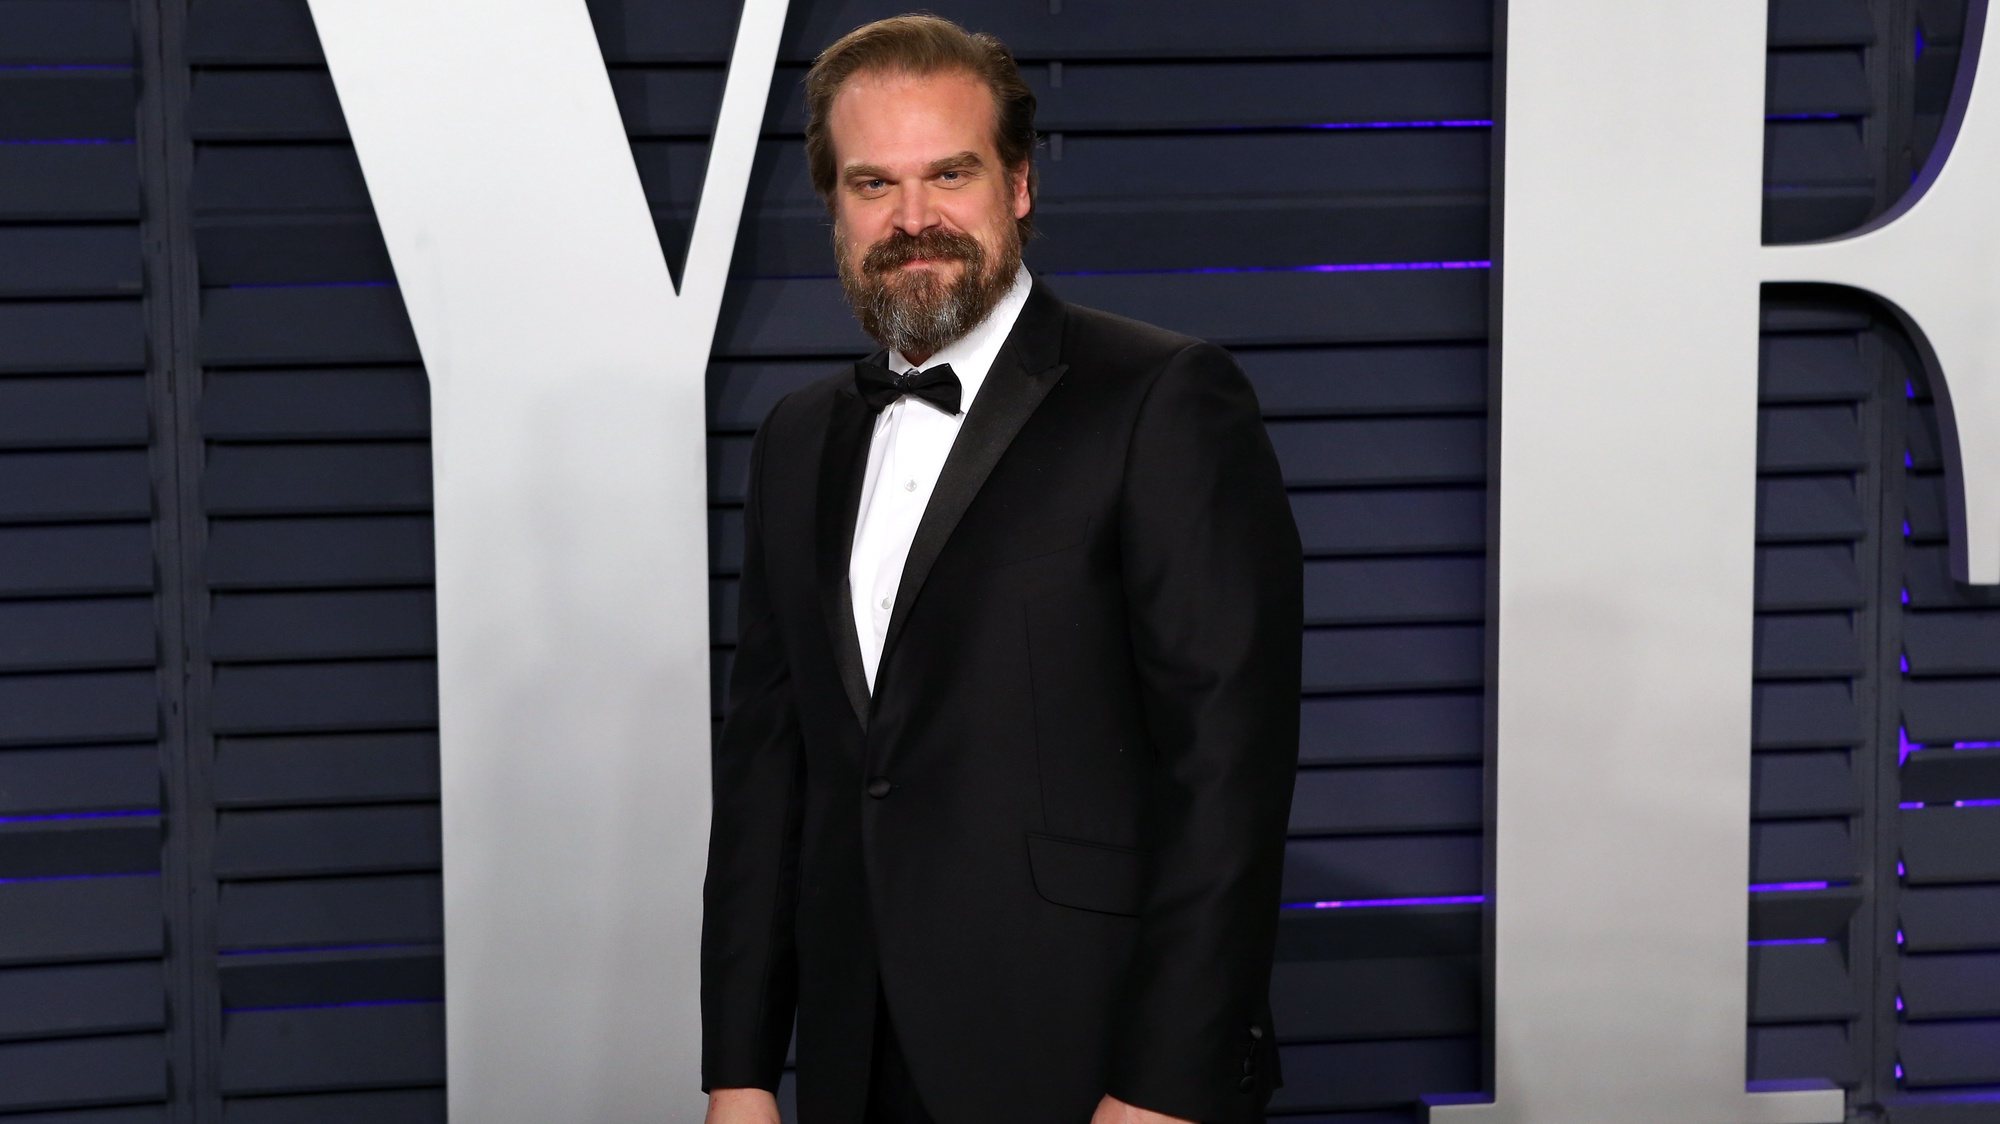 epa07396849 David Harbour poses at the 2019 Vanity Fair Oscar Party following the 91st annual Academy Awards ceremony, in Beverly Hills, California, USA, 24 February 2019. The Oscars are presented for outstanding individual or collective efforts in 24 categories in filmmaking. The Oscars are presented for outstanding individual or collective efforts in 24 categories in filmmaking.  EPA/NINA PROMMER